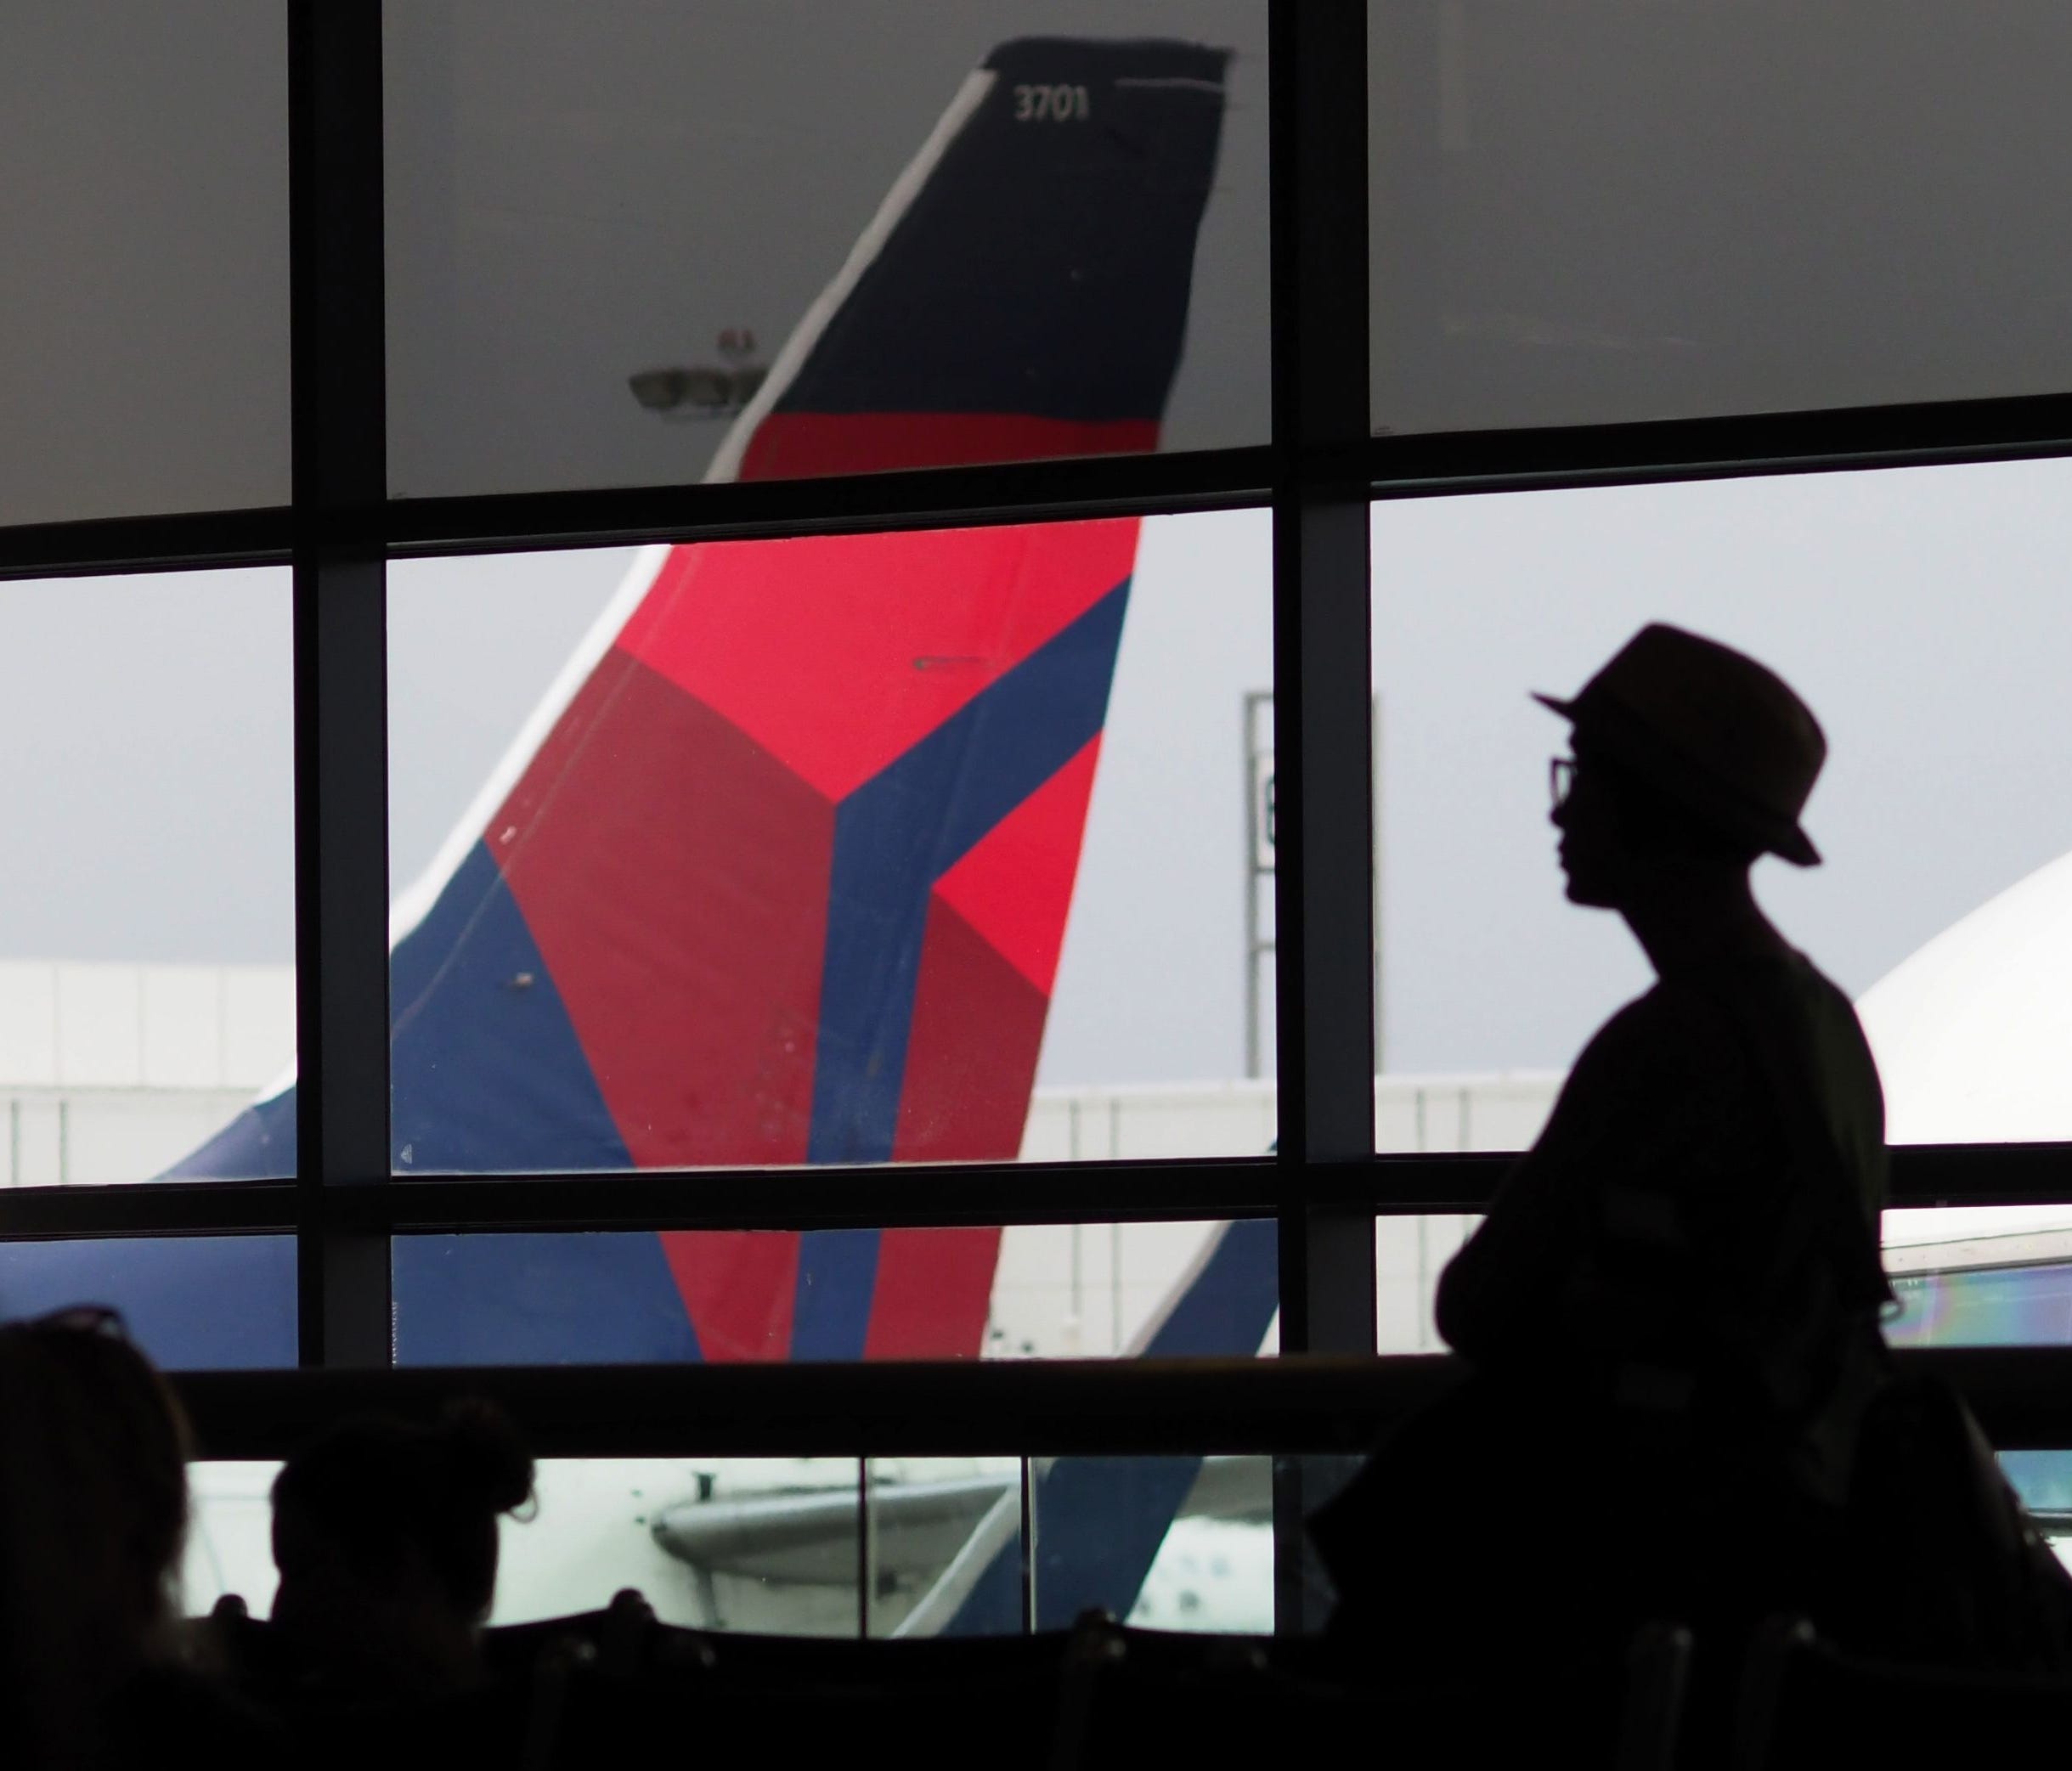 A passengers waits for a Delta Airlines flight in Terminal 5 at Los Angeles International Airport, May 4, 2017 in Los Angeles, Calif.